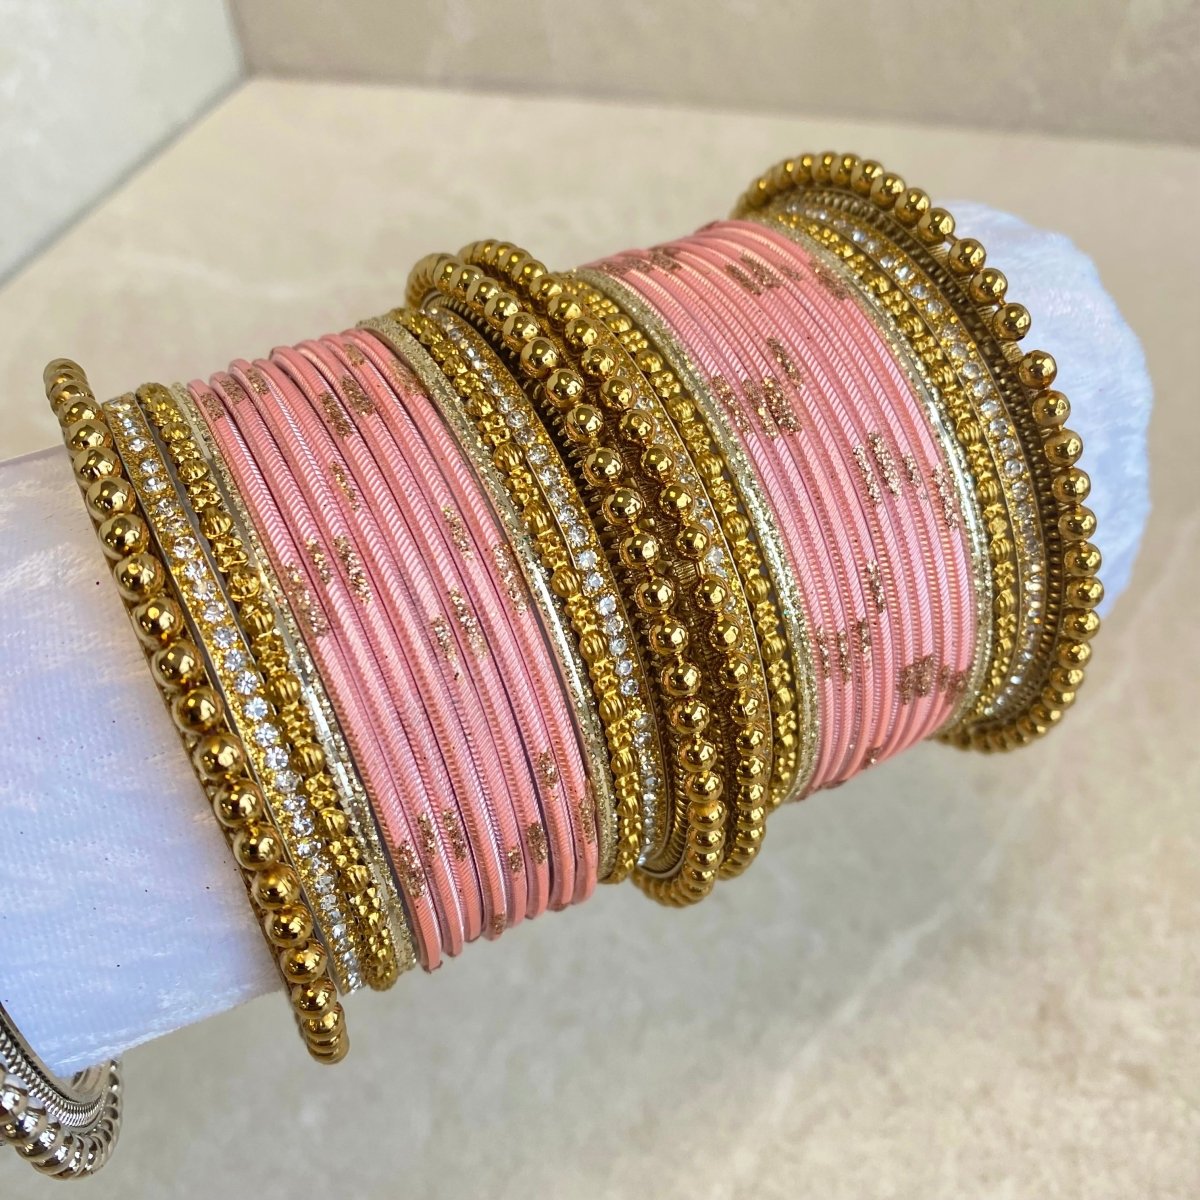 (Slightly less than perfect) 2.10 Clearance Bangle Set x2 + extra colours - SOKORA JEWELS(Slightly less than perfect) 2.10 Clearance Bangle Set x2 + extra coloursBANGLES